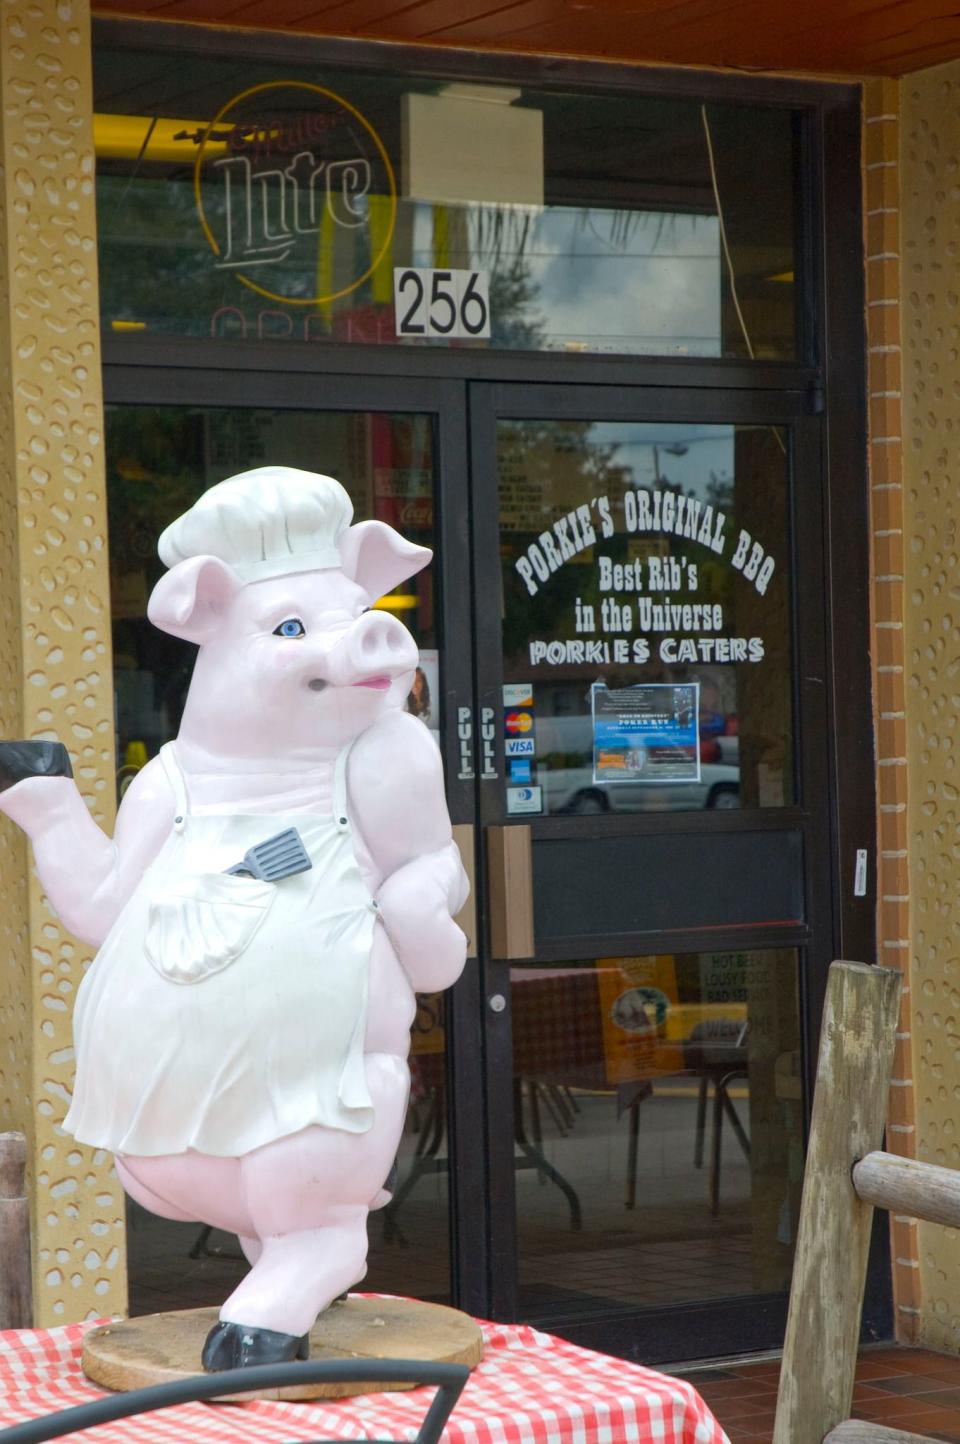 Porkie’s Original BBQ in Apopka has closed after 20 years in business.